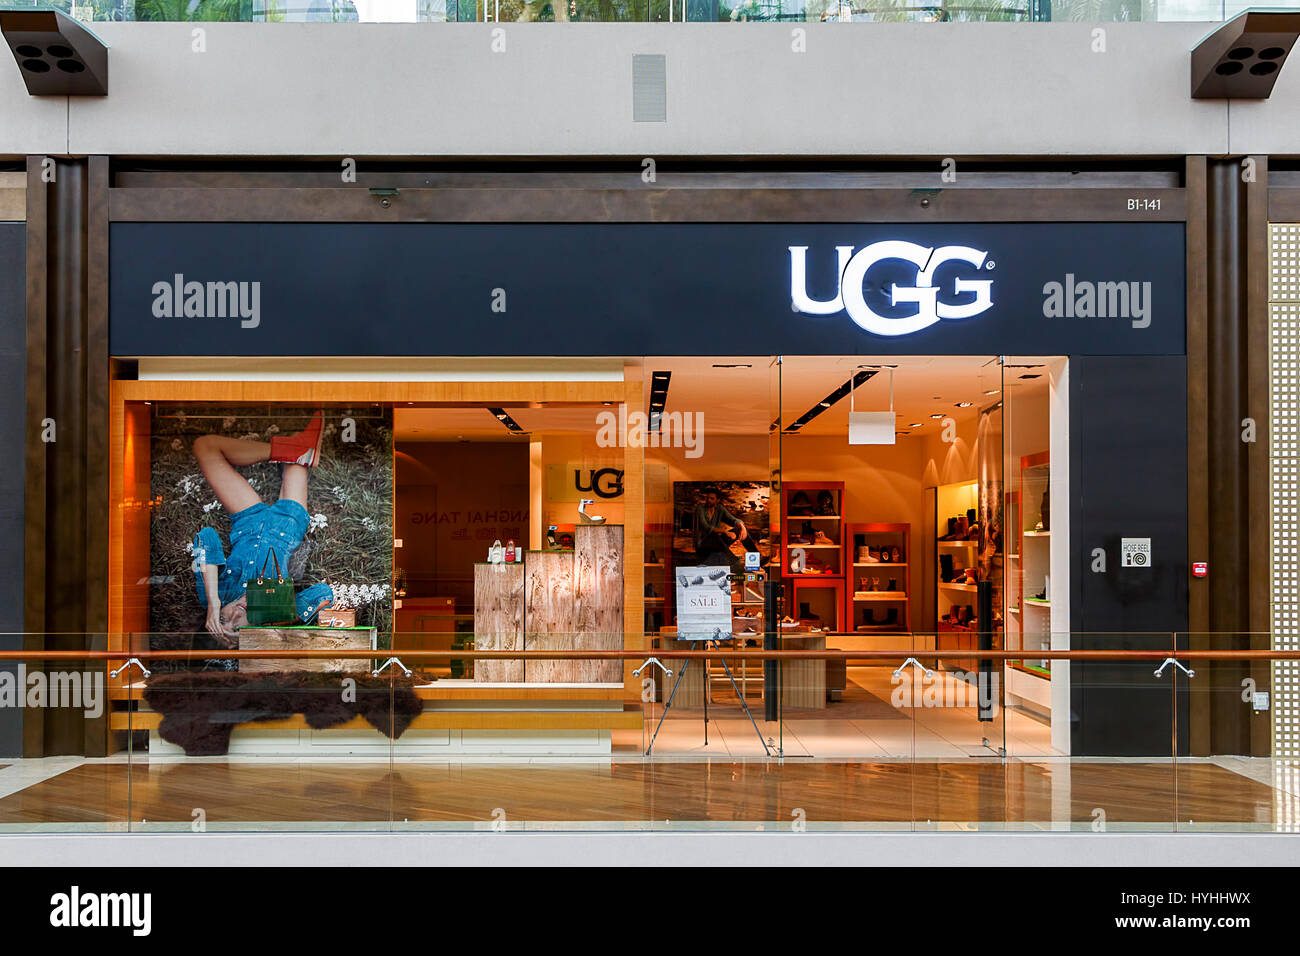 ugg store willow grove mall